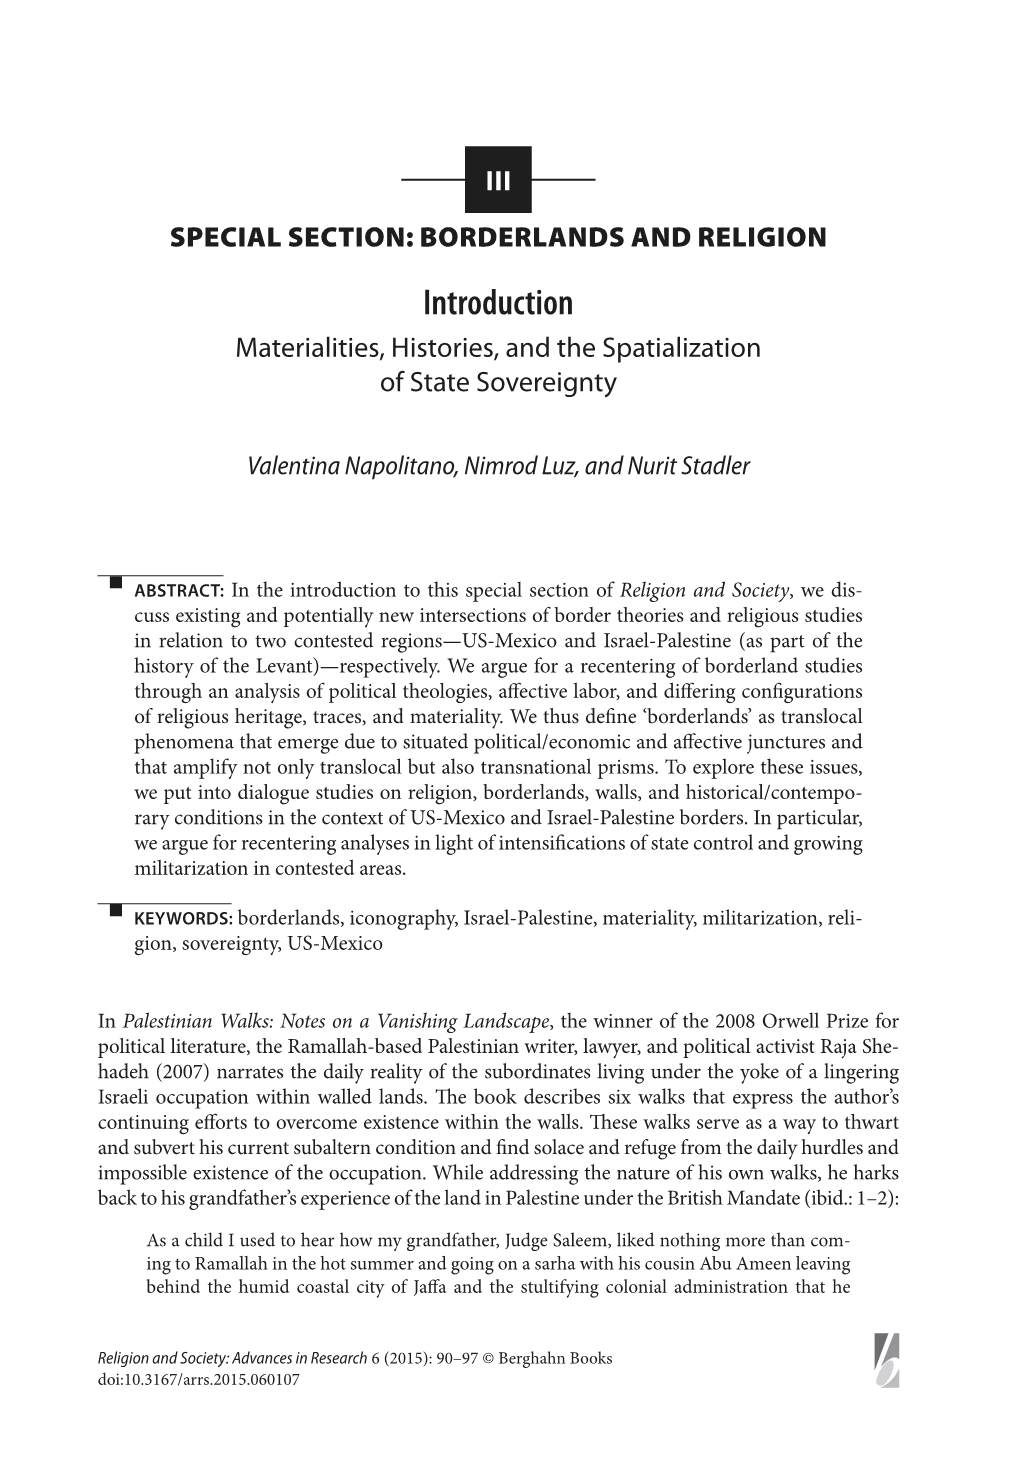 Introduction Materialities, Histories, and the Spatialization of State Sovereignty